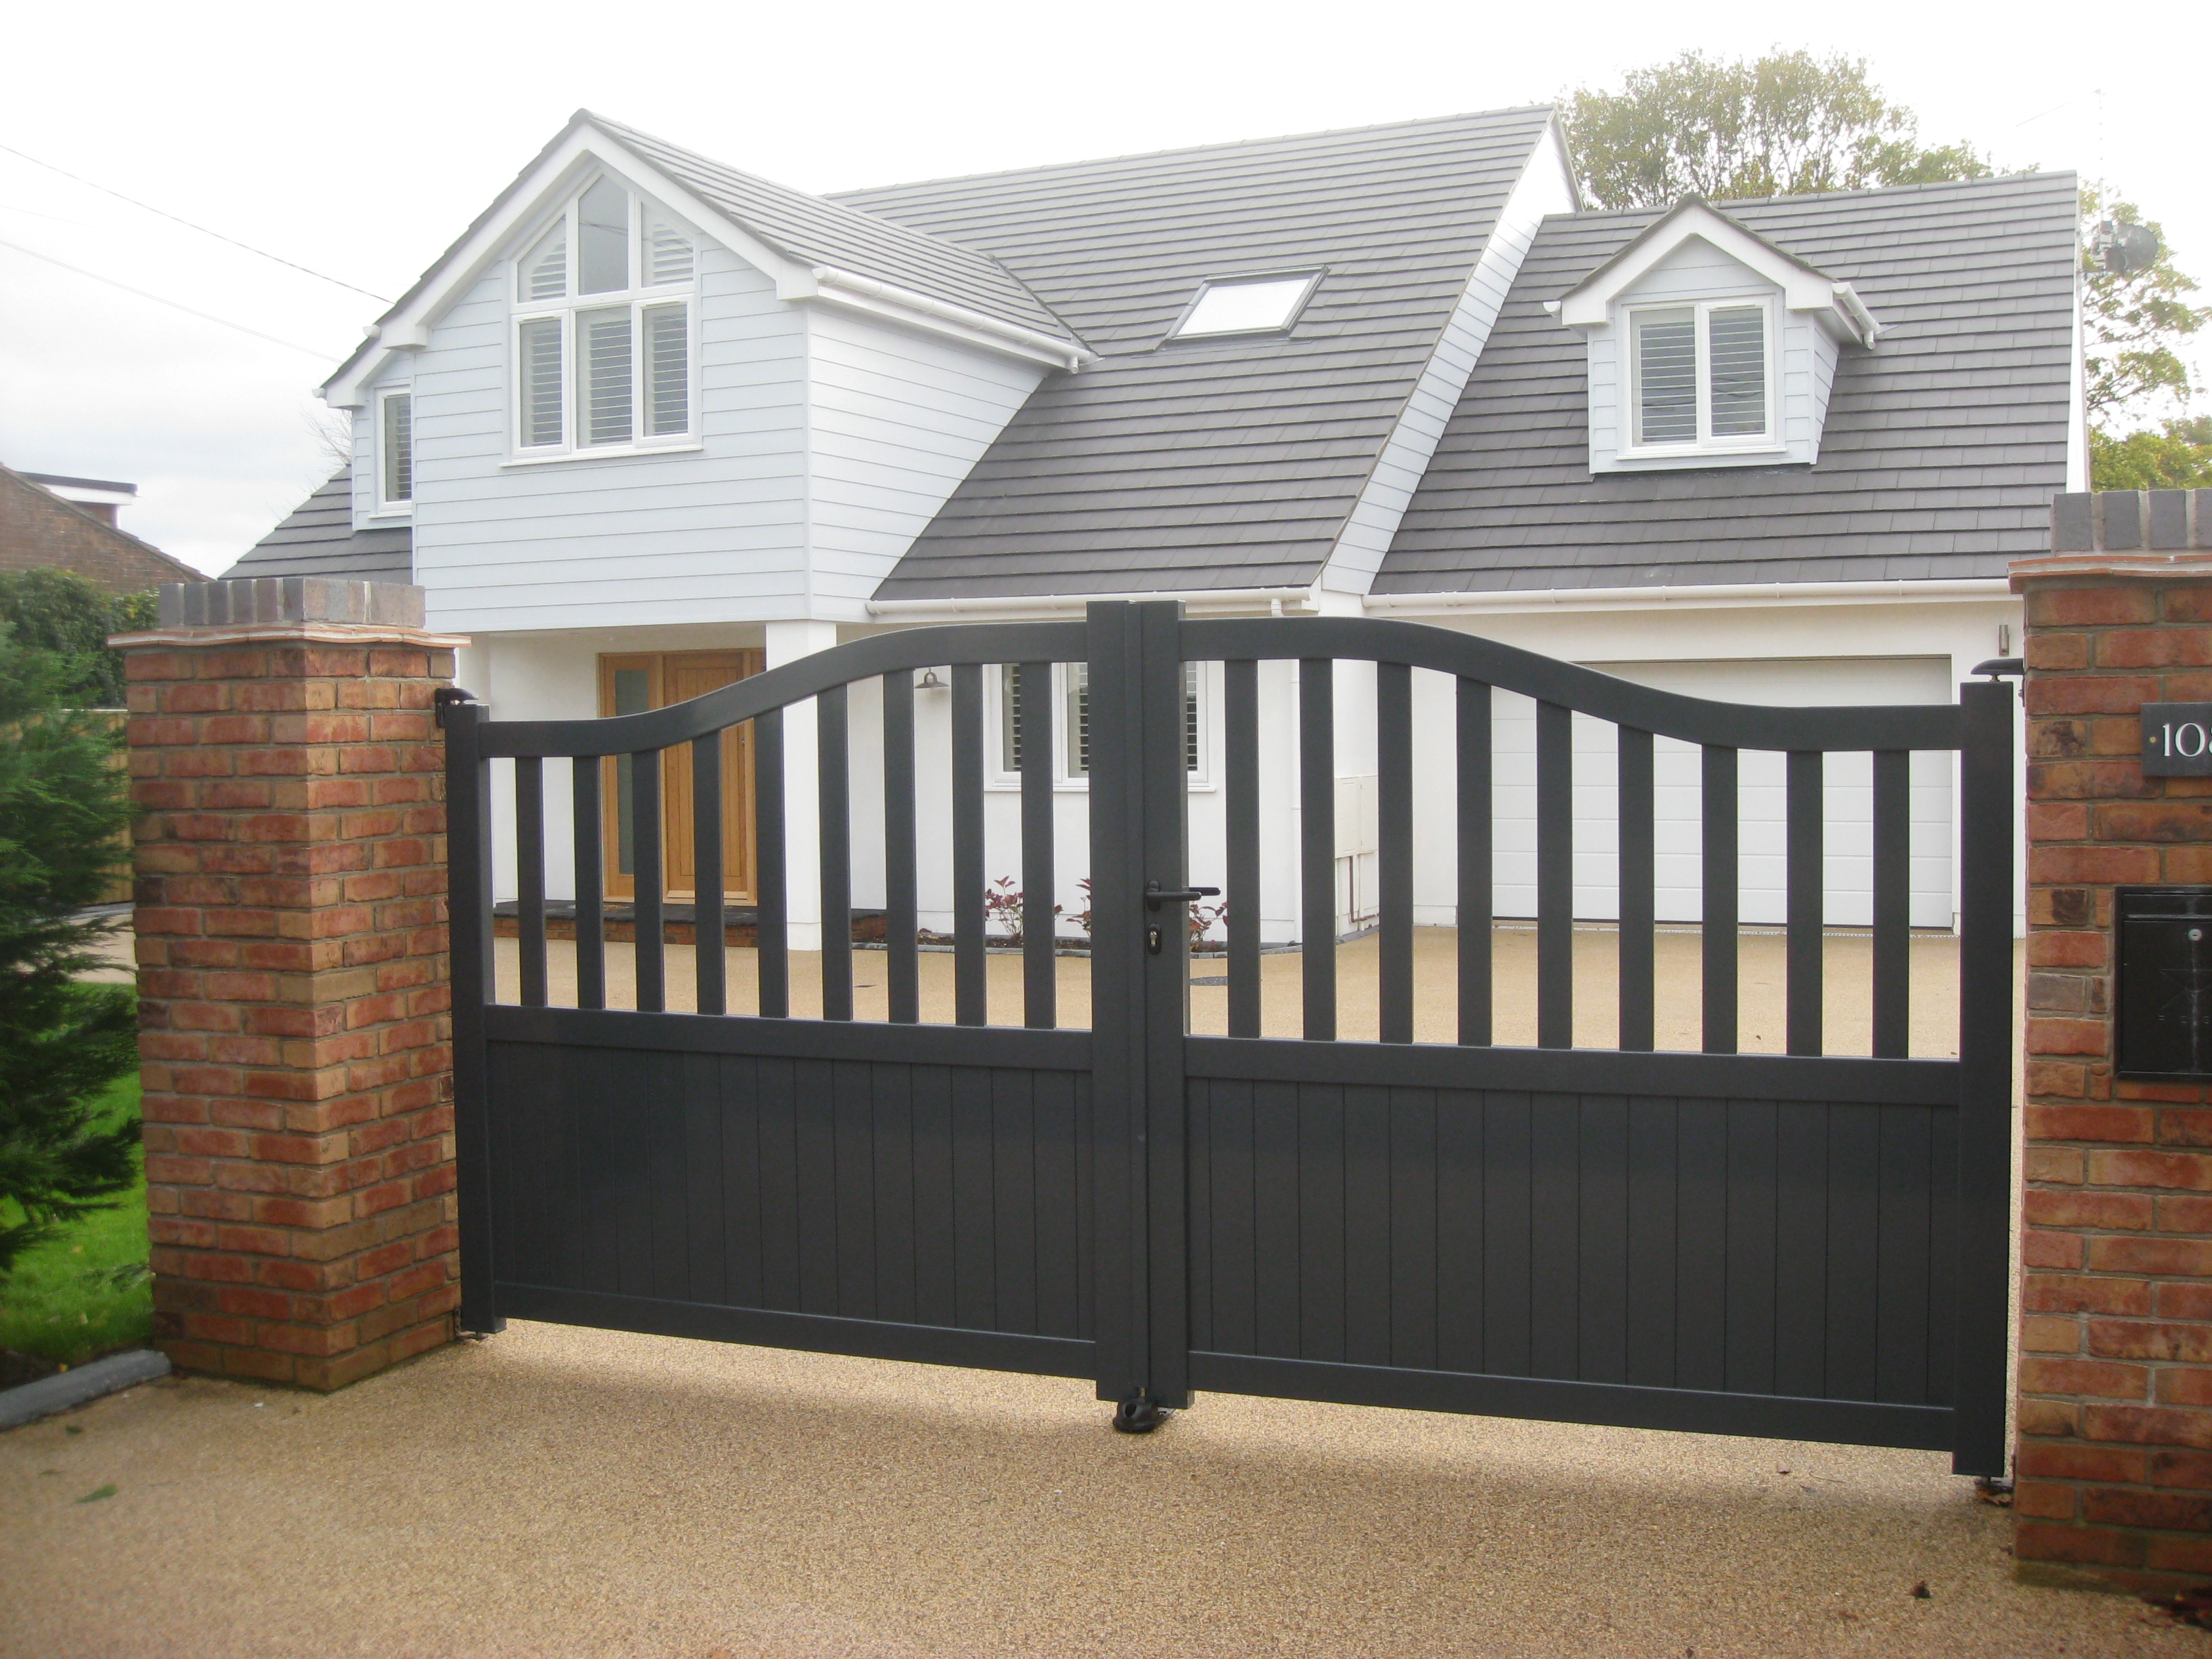 A charcoal finished aluminium driveway gate in front of a large white house